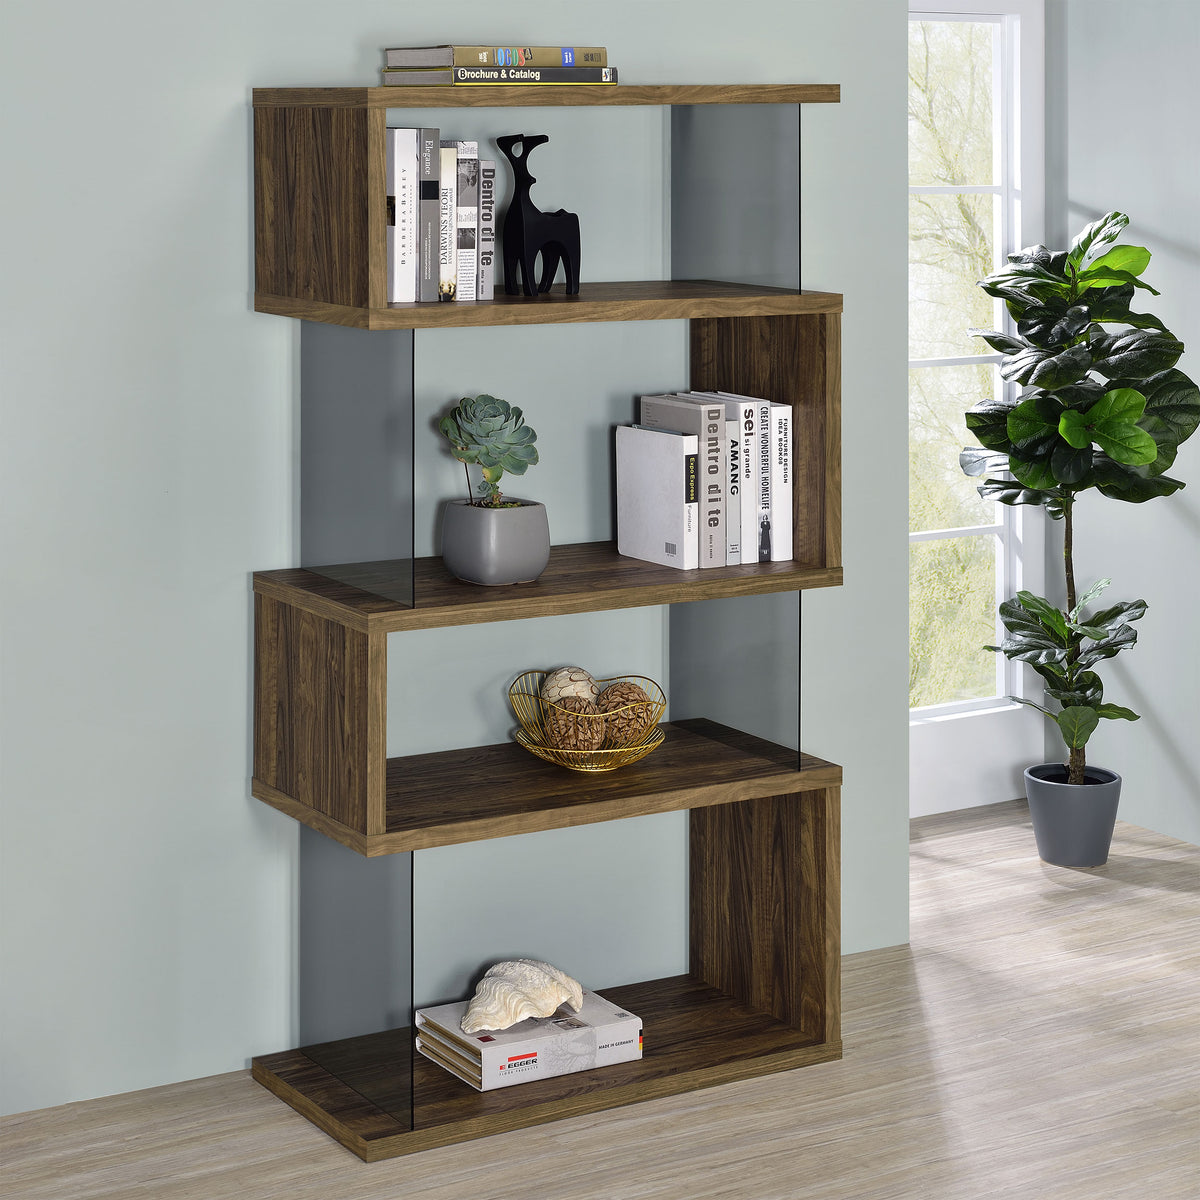 Emelle 4-shelf Bookcase with Glass Panels  Half Price Furniture